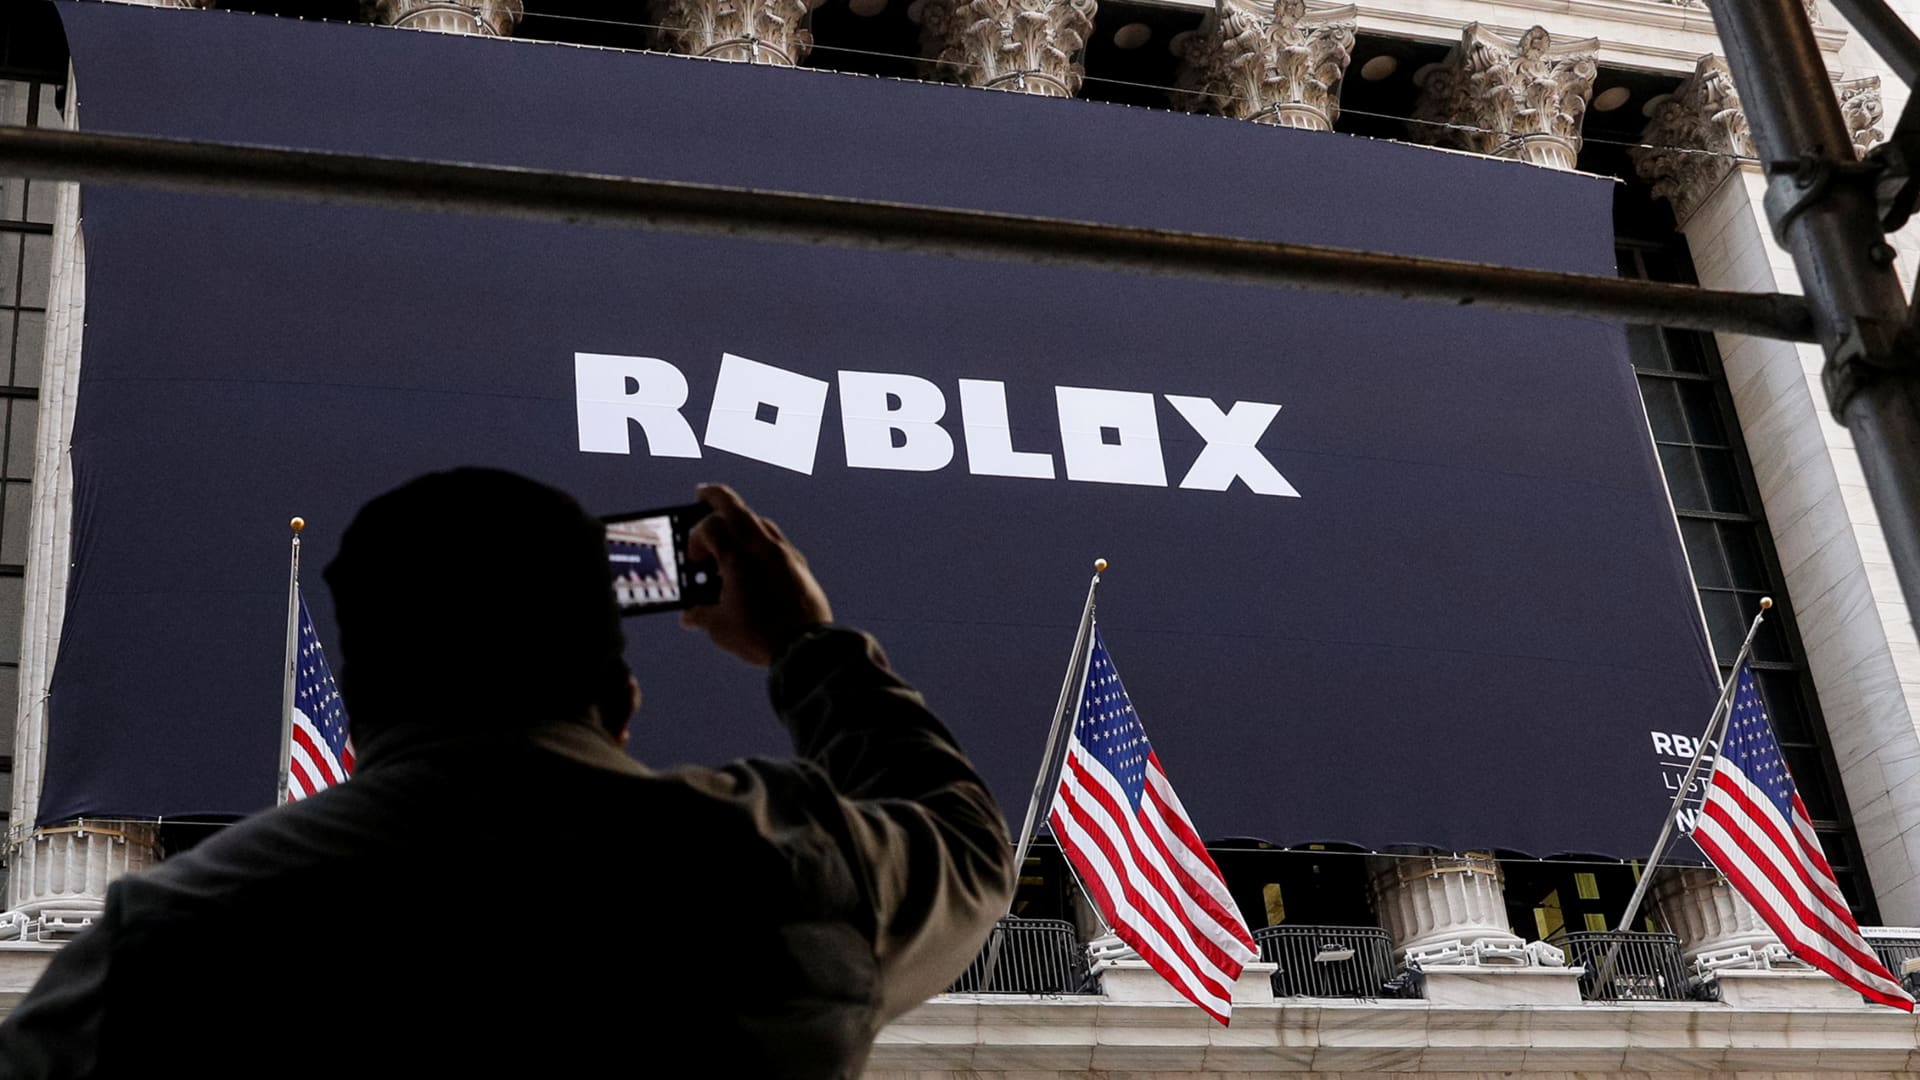 Roblox: Buy The Growth Story (NYSE:RBLX)